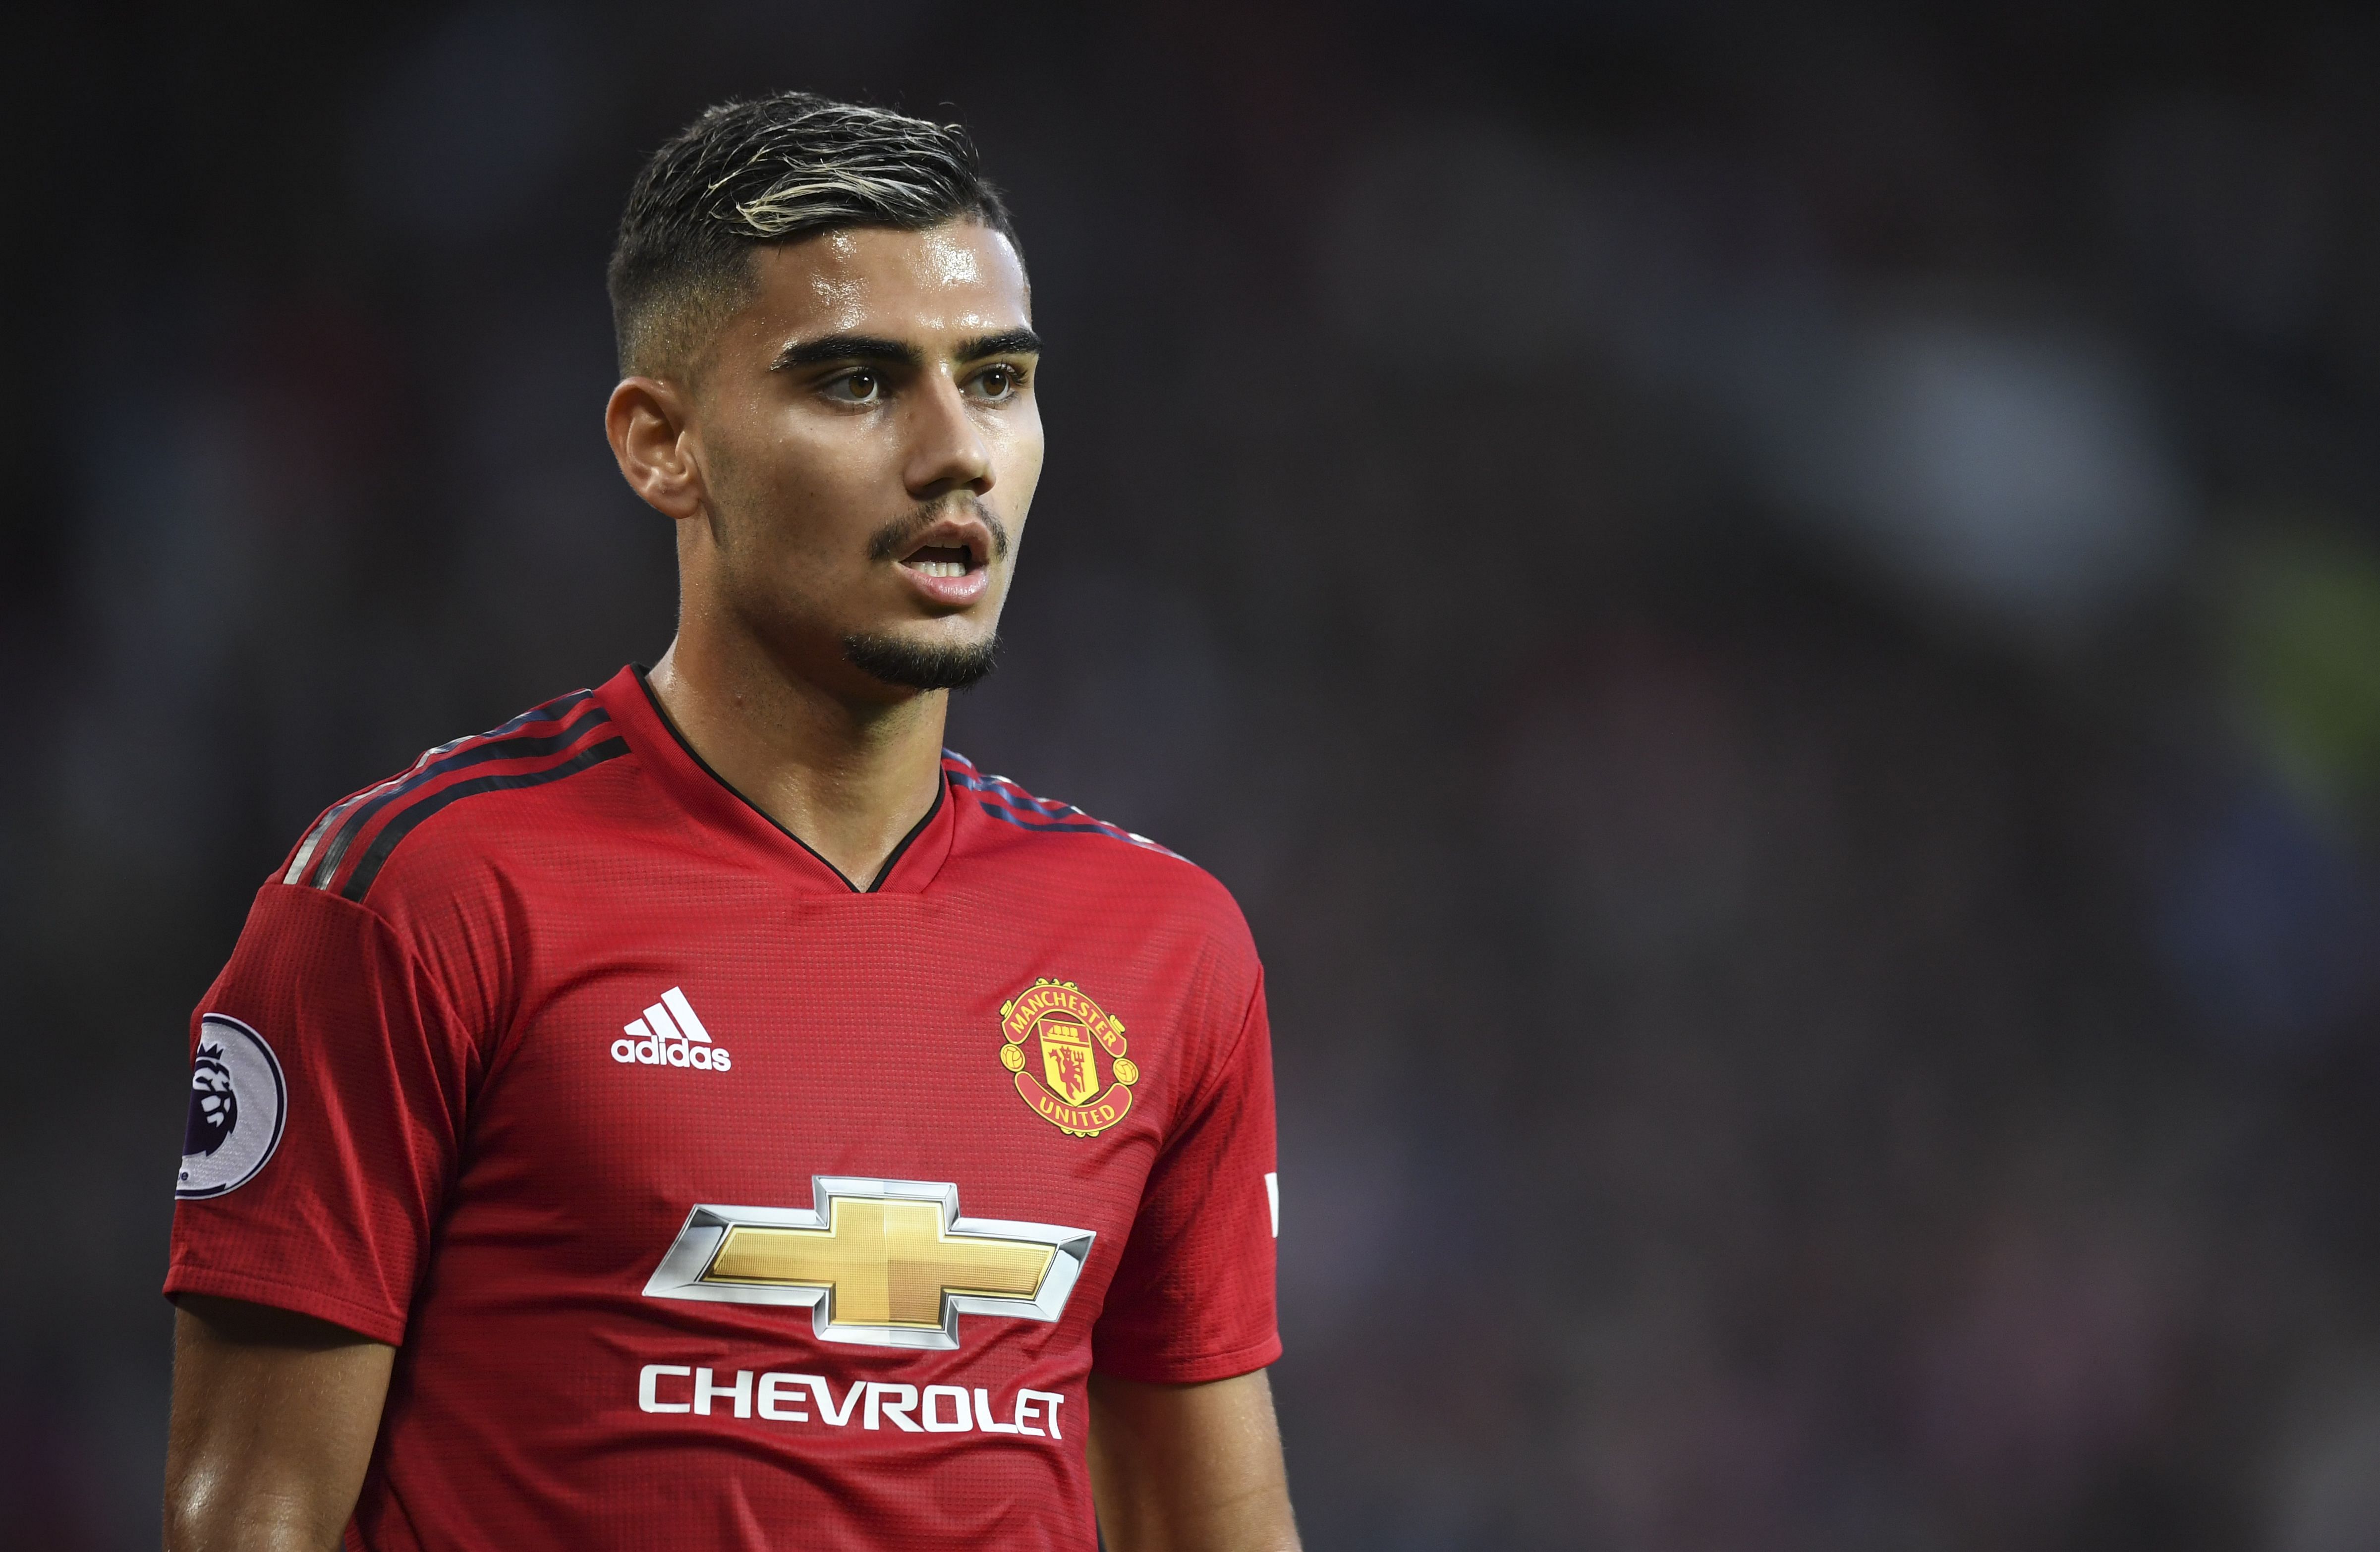 Manchester United should part ways with Andreas Pereira in the summer